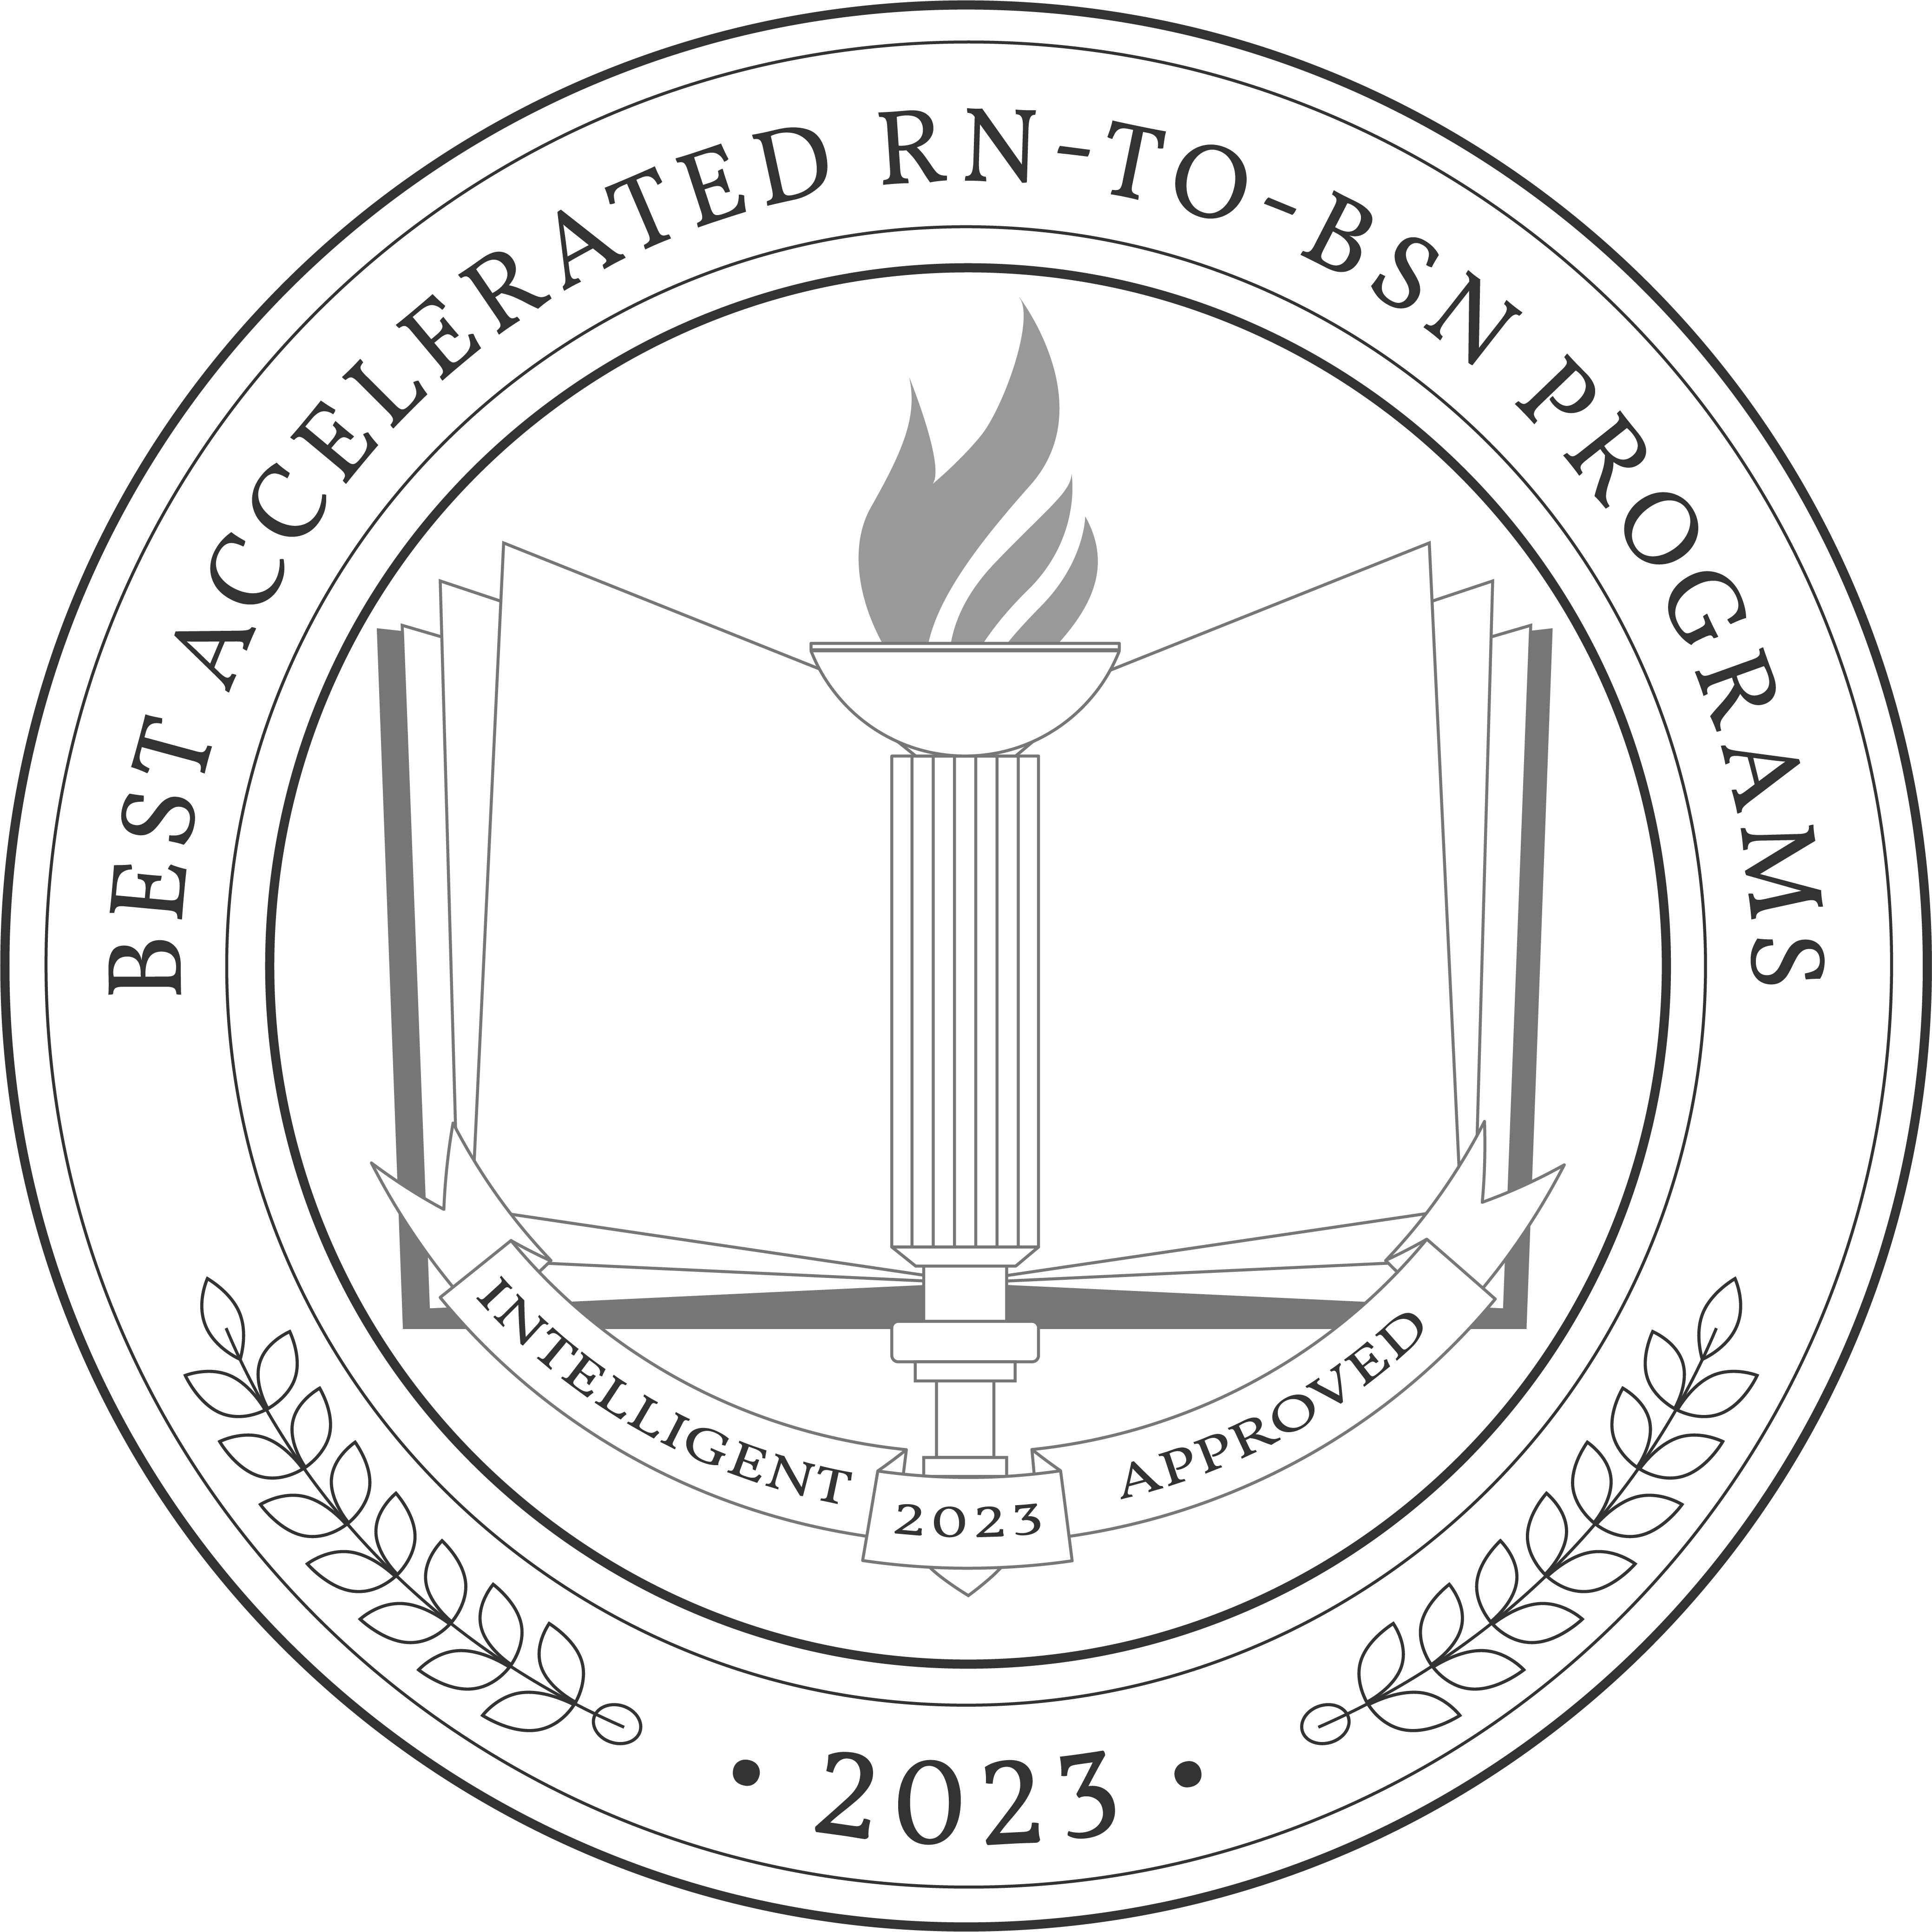 Best Accelerated RN-to-BSN Programs 2023